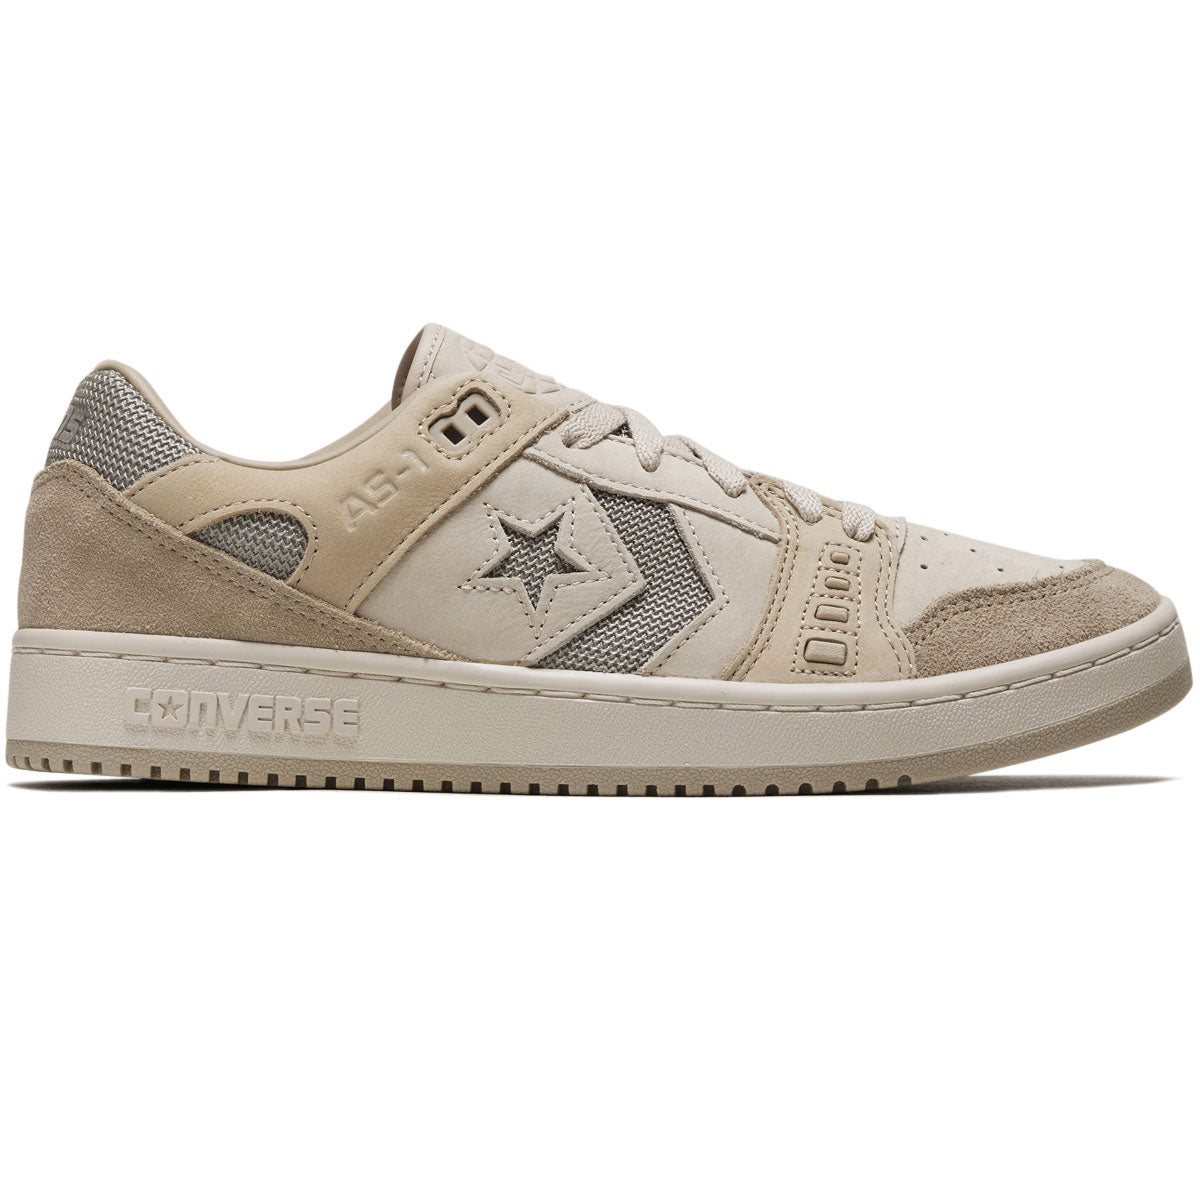 Converse AS-1 Pro Ox Shoes - Shifting Sand/Warm Sand image 1